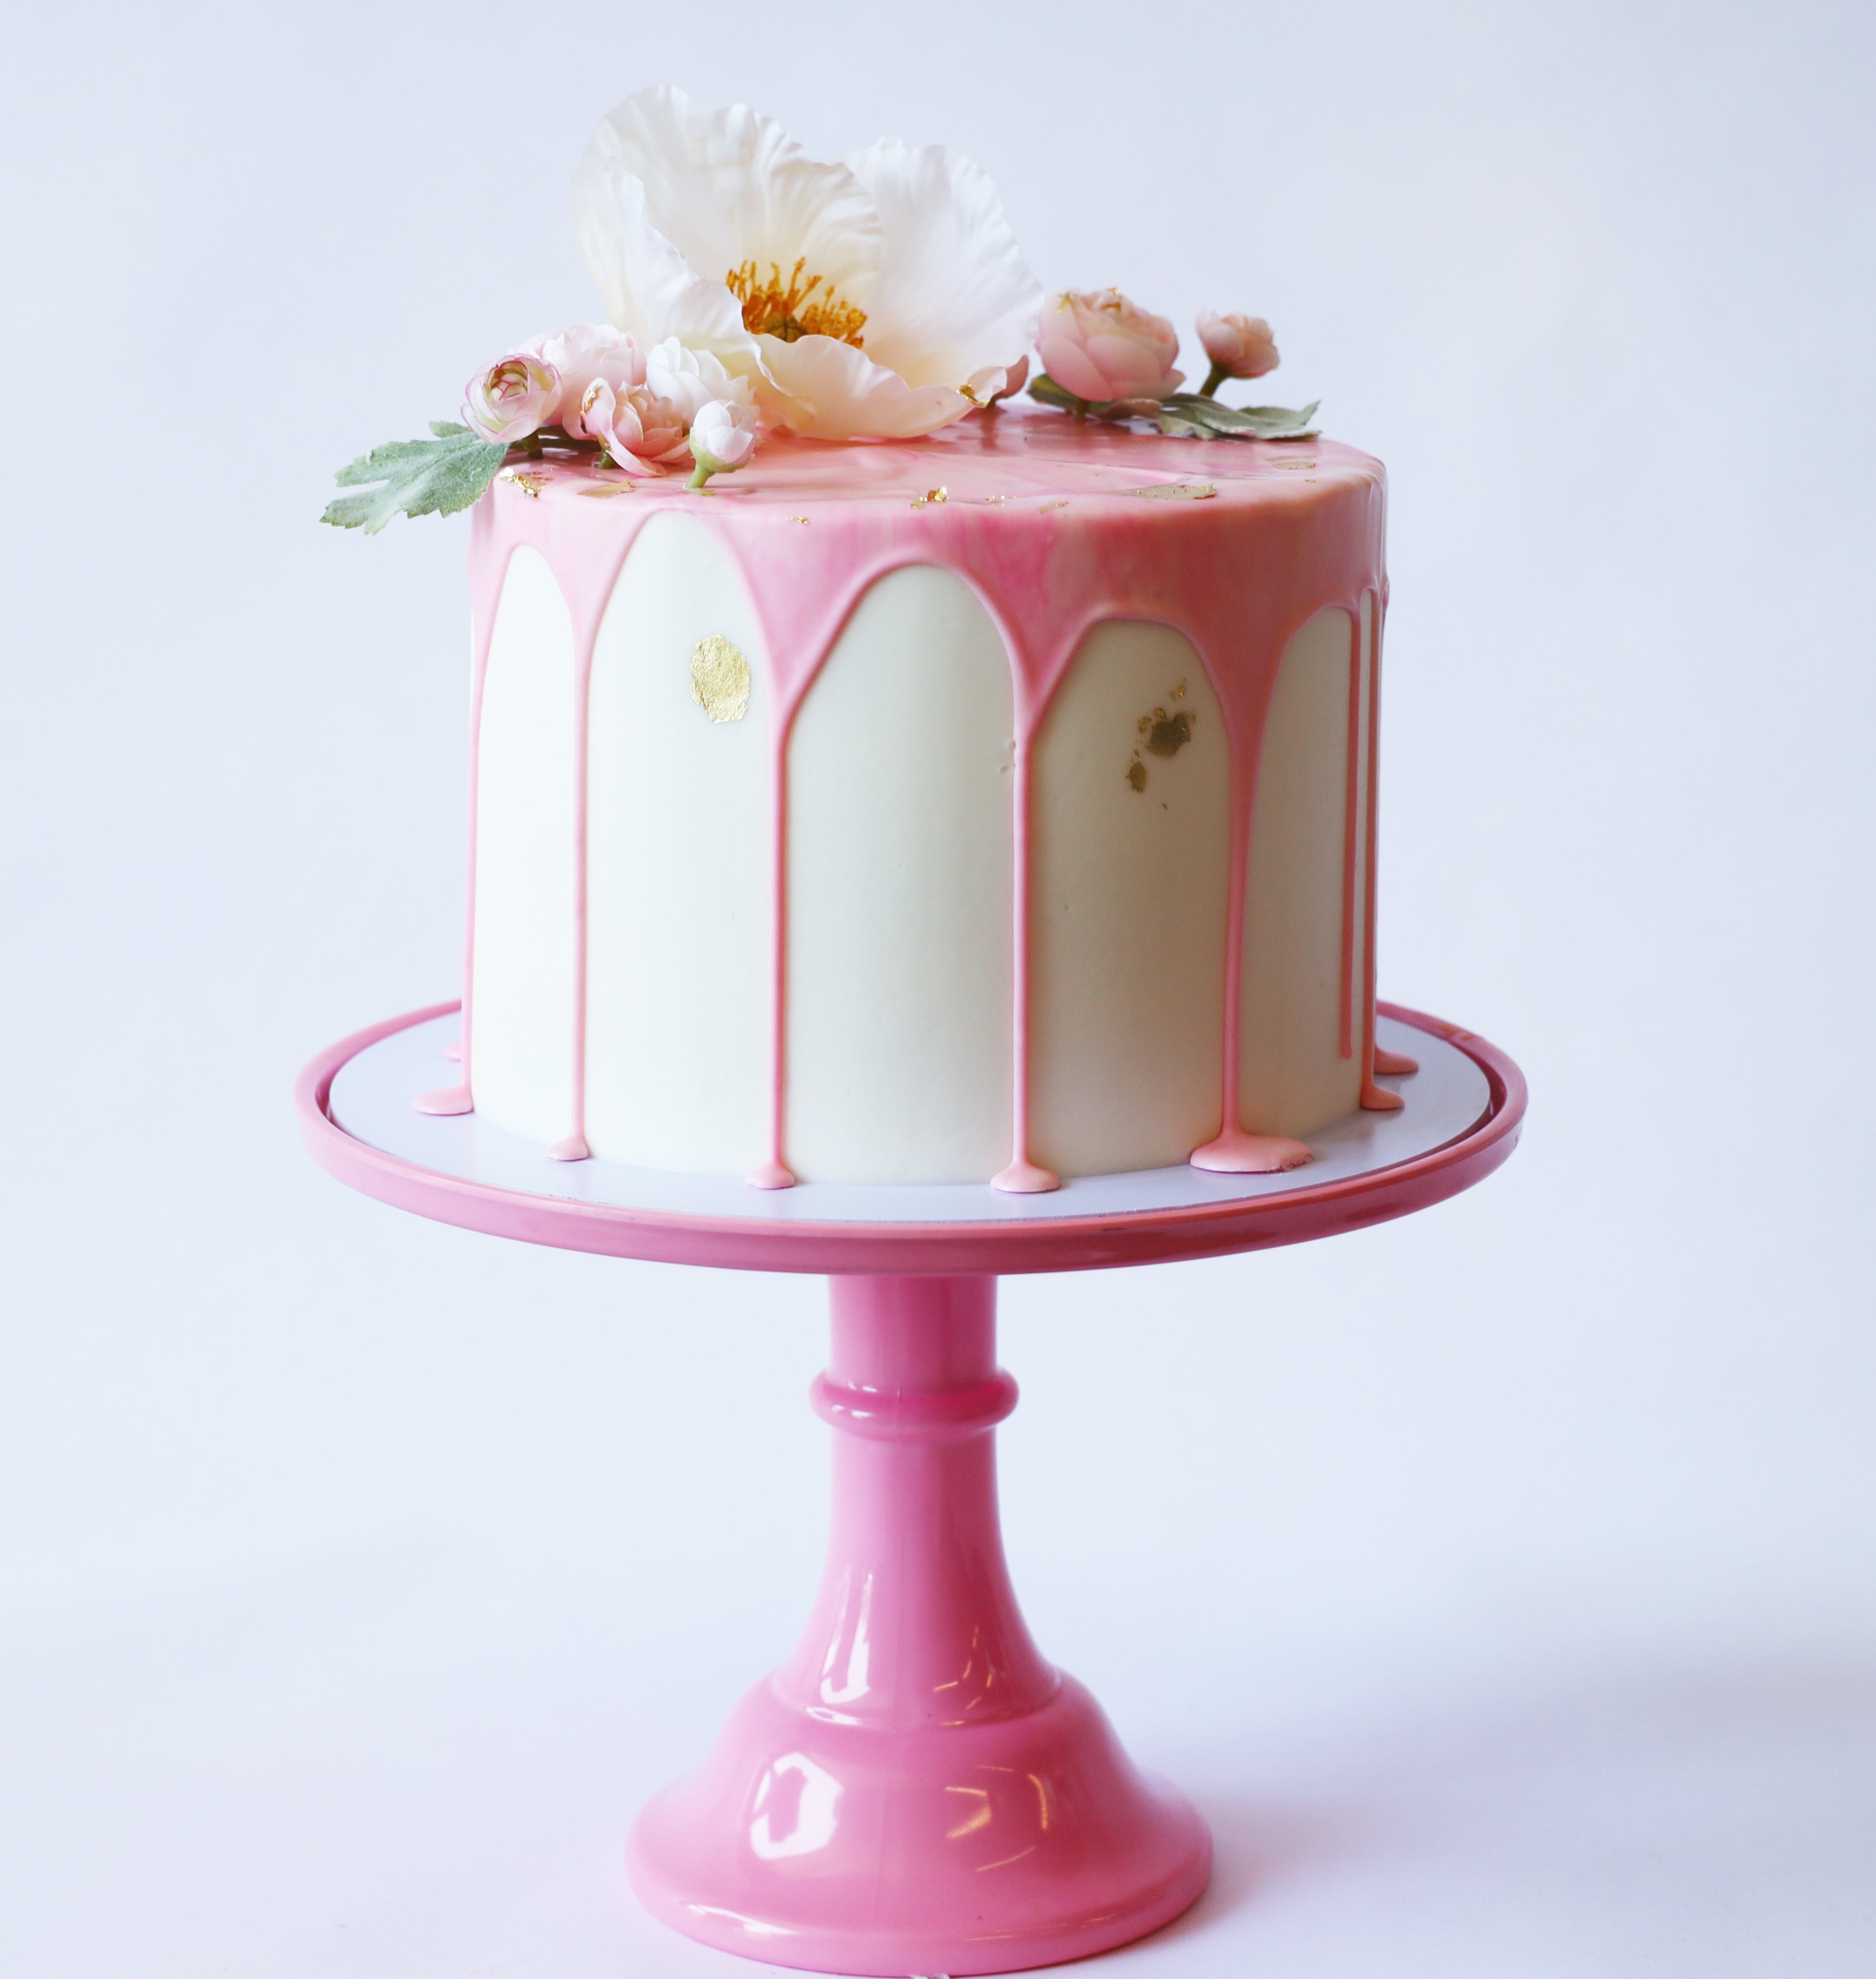 7 Wedding Cake Trends to Know in 2023